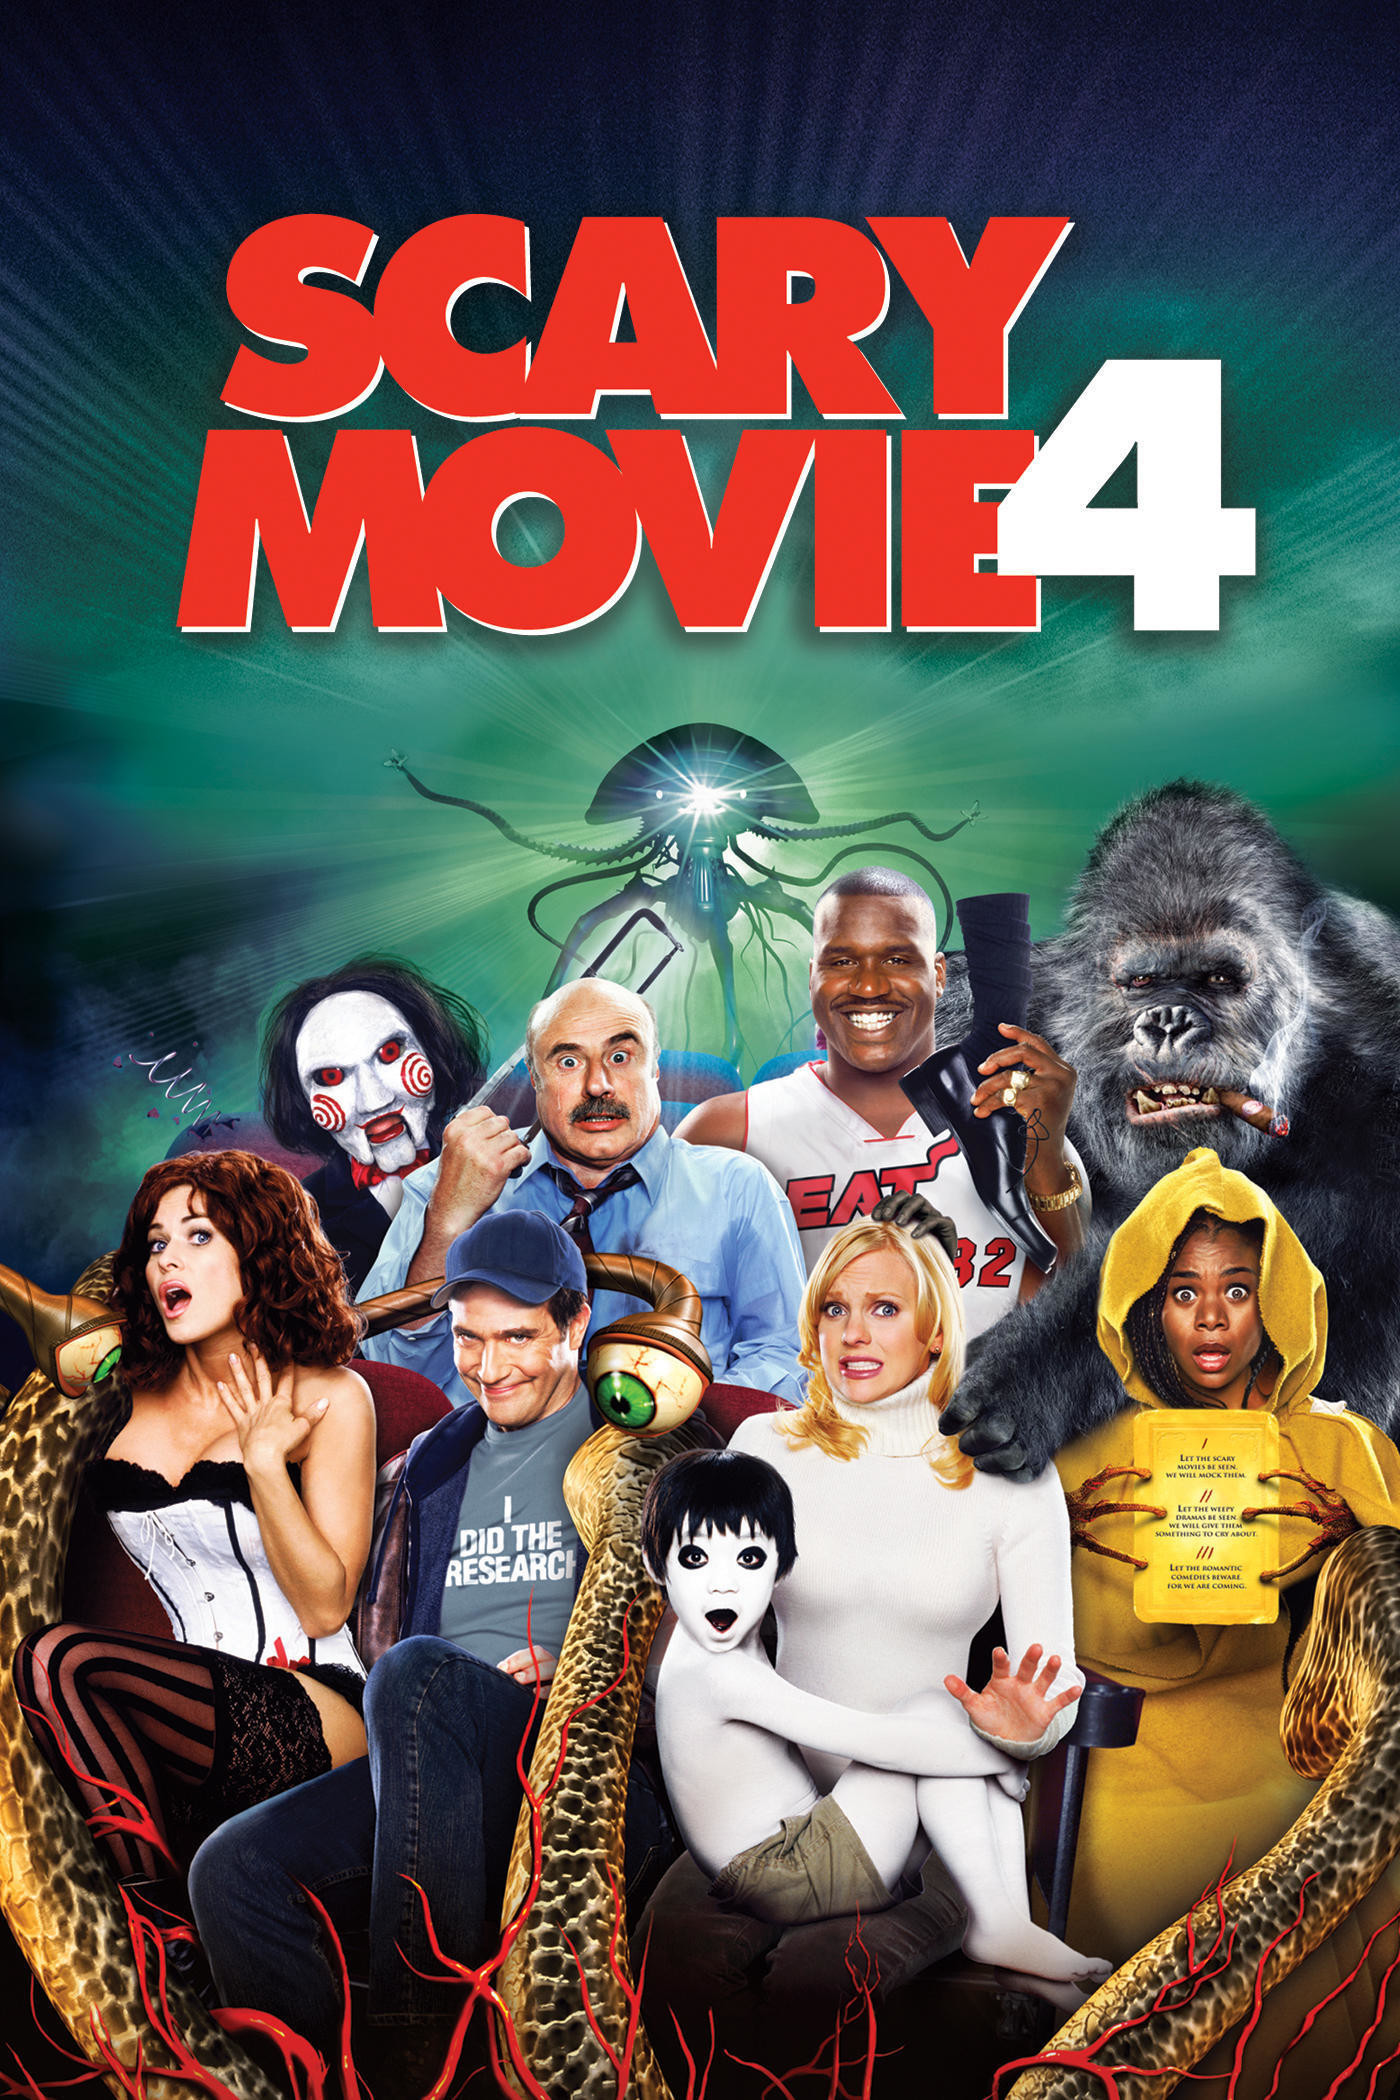 Scary Movie 4 (2006) 480p BluRay Hindi ORG Dual Audio Movie UNRATED ESubs [350MB]